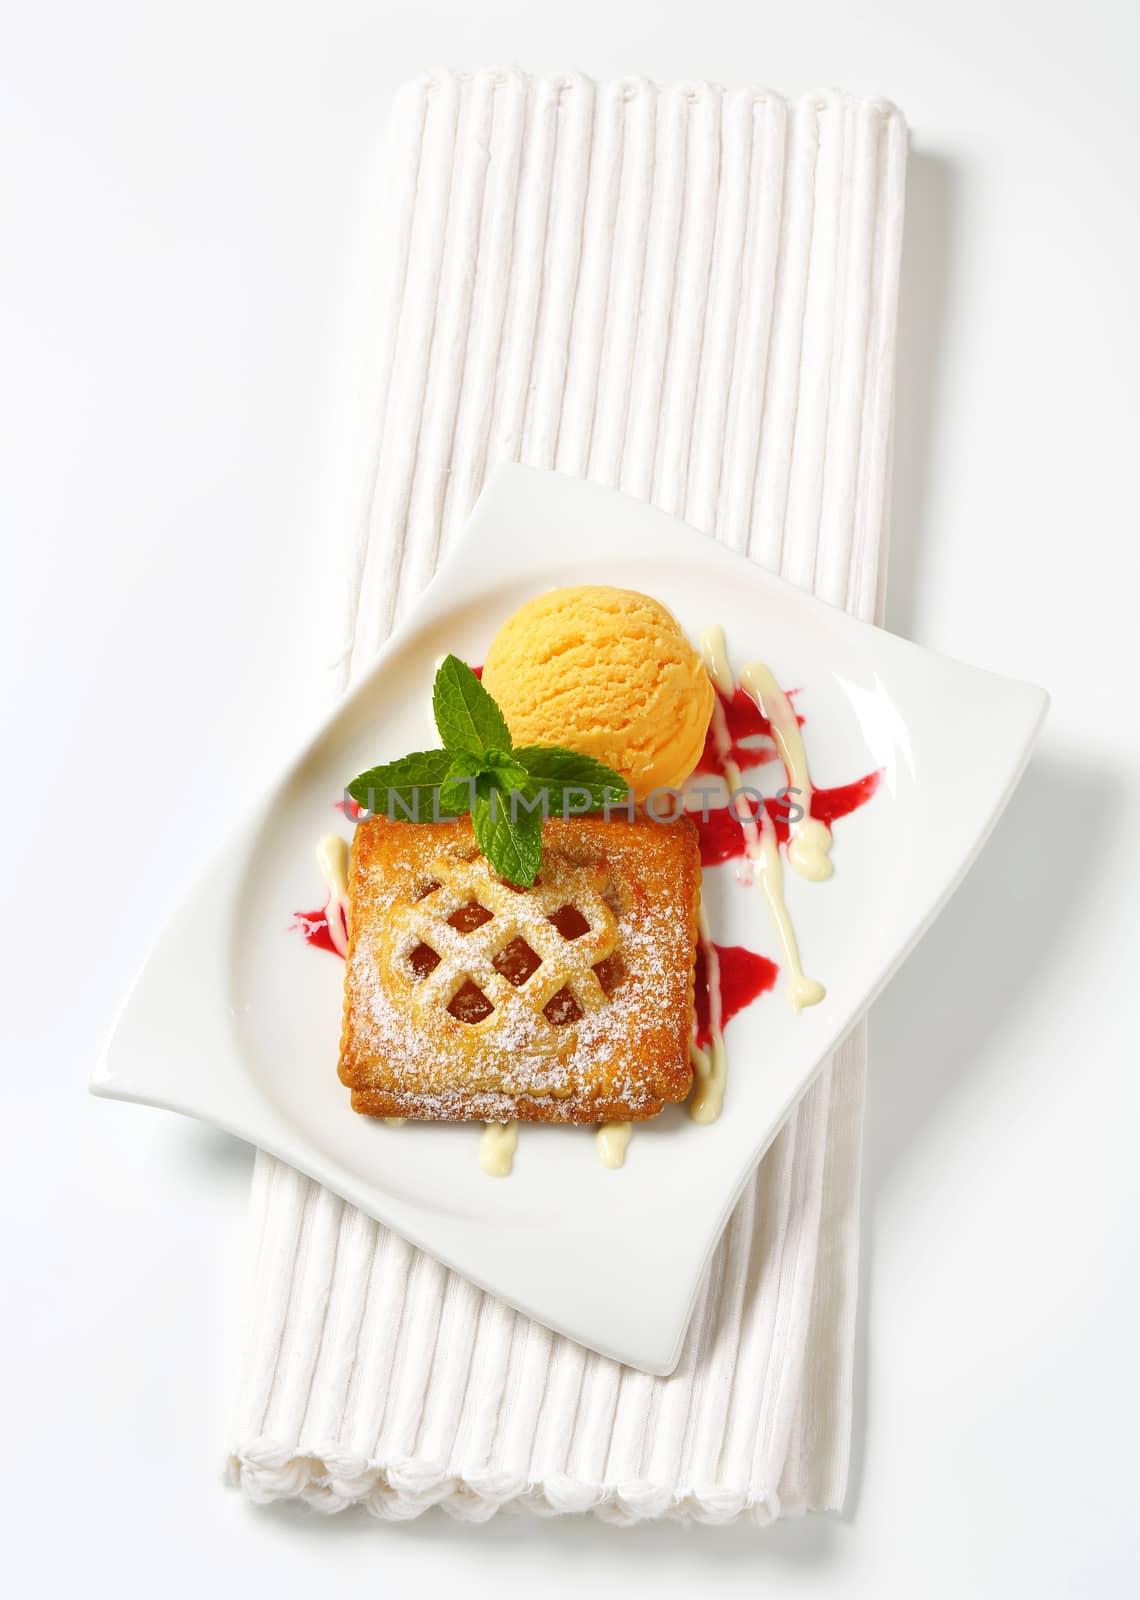 Little lattice-topped apricot pie with a scoop of ice cream